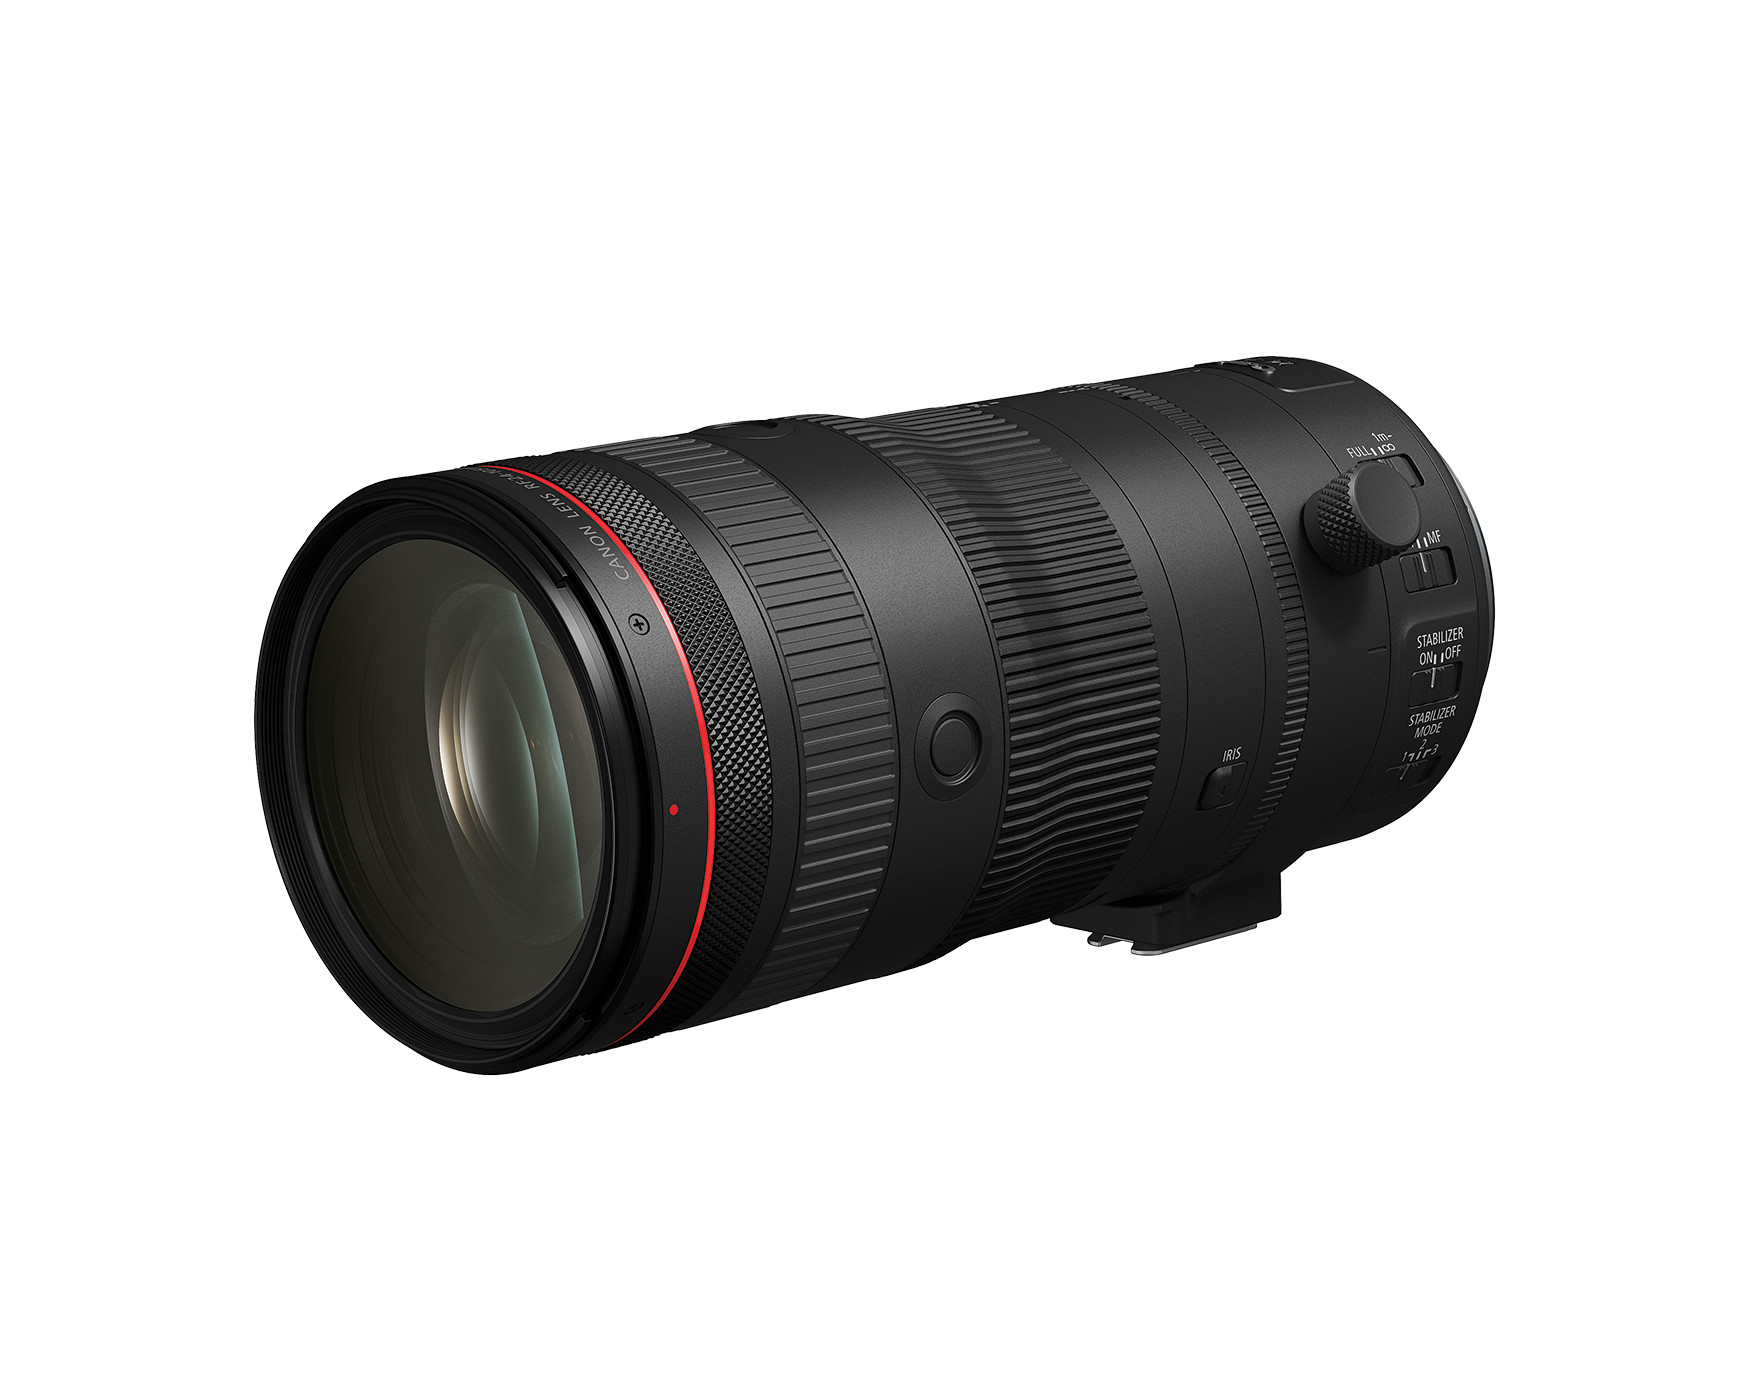 pr rf24 105mm 2 - Canon Introduces Three New Lenses, Enhancing Still Photography and Video Production for Any Skill Level